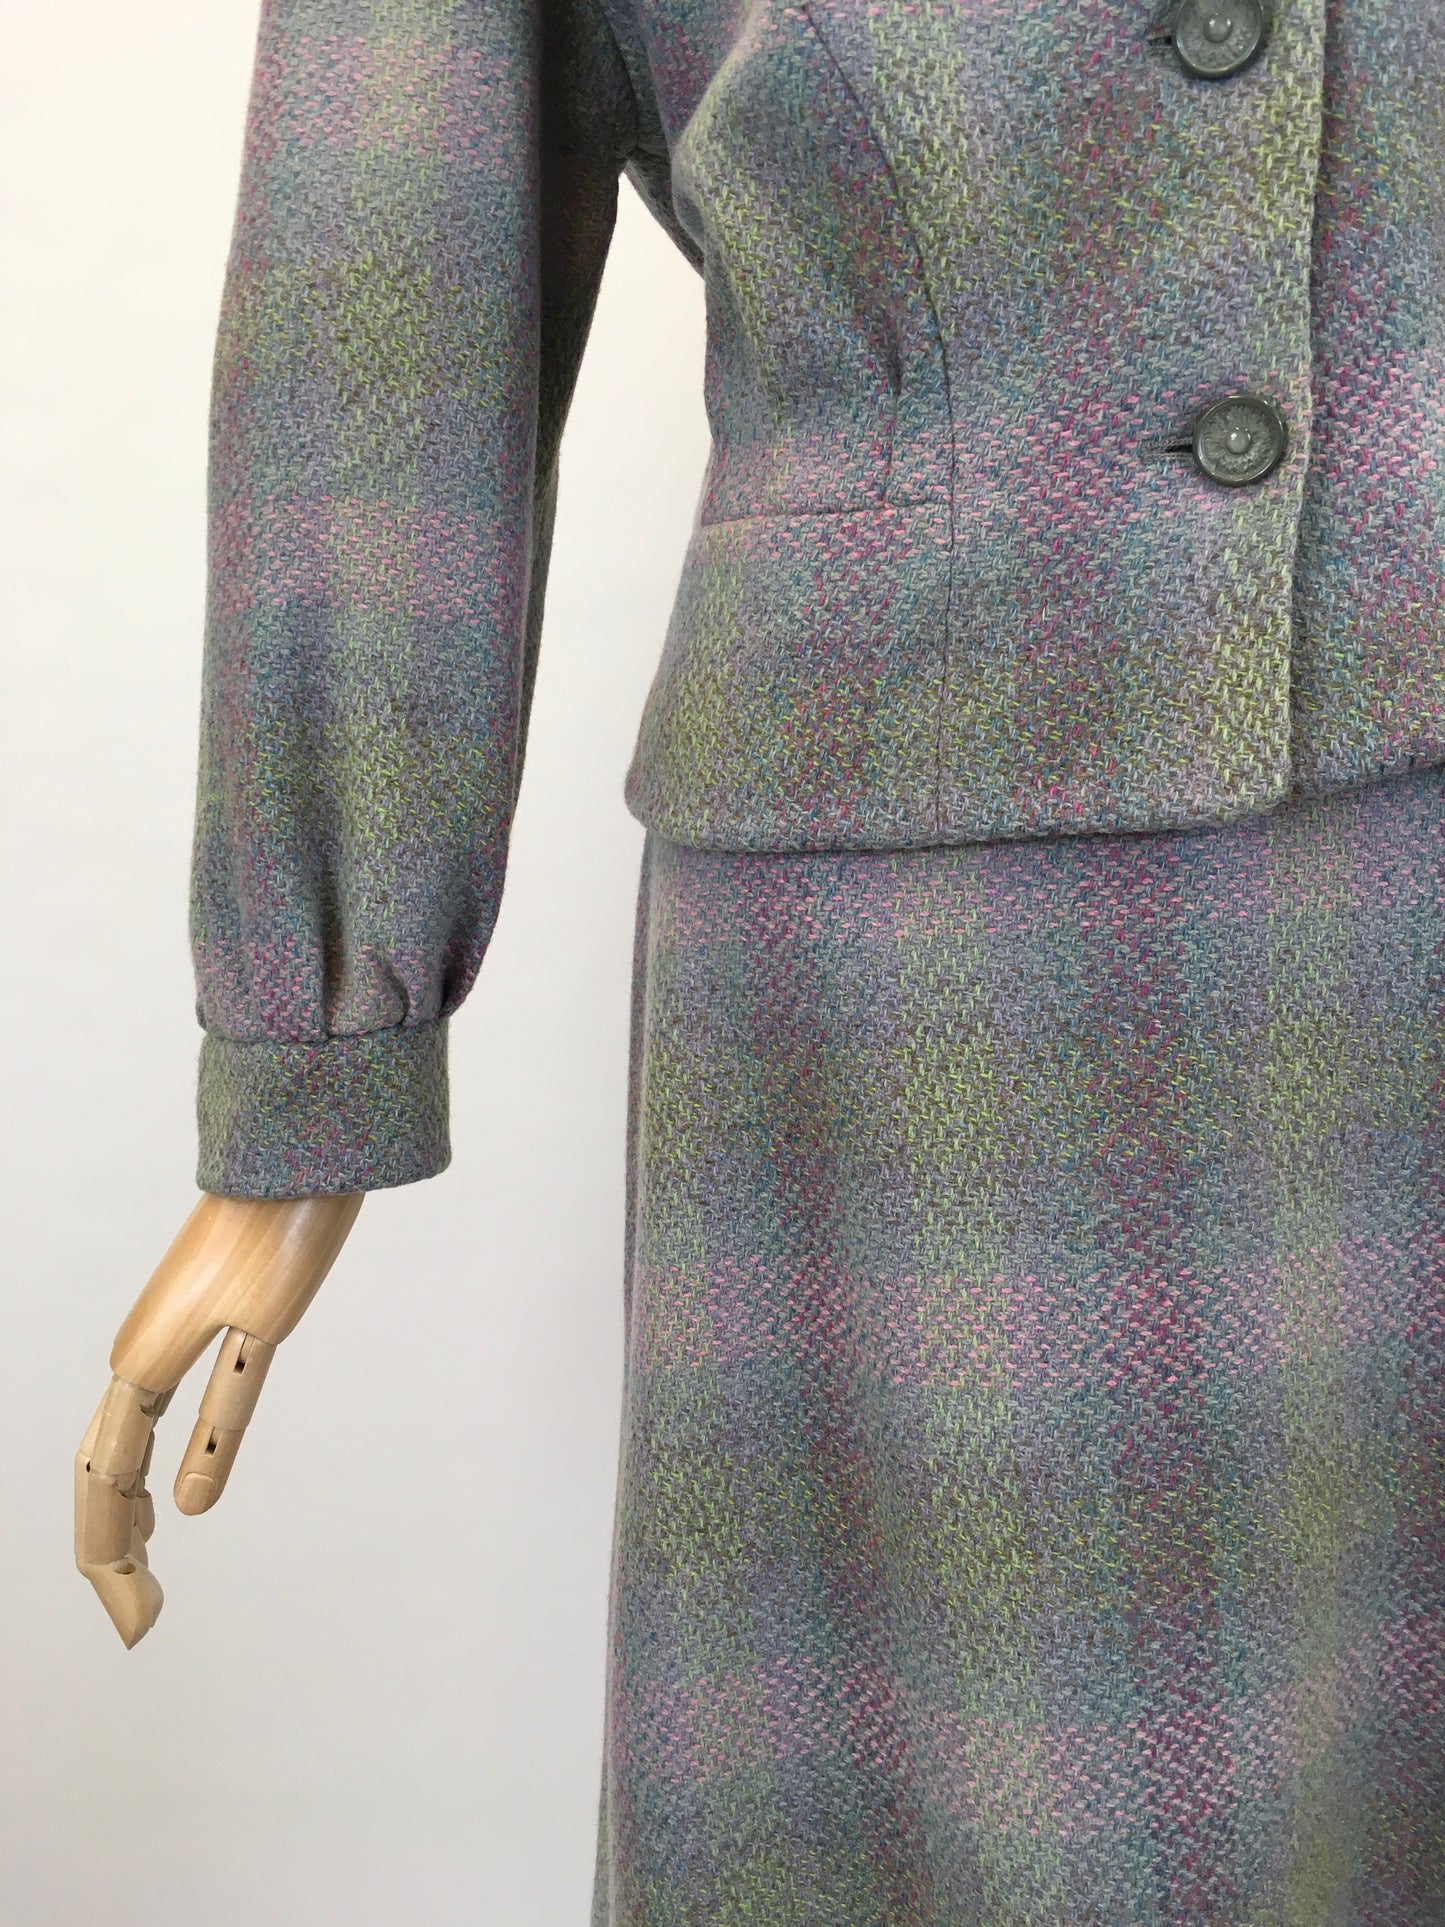 RESERVED DO NOT BUY - Original Early 1950’s 2pc Wool Suit - In A Lovely Springtime Colour Pallet